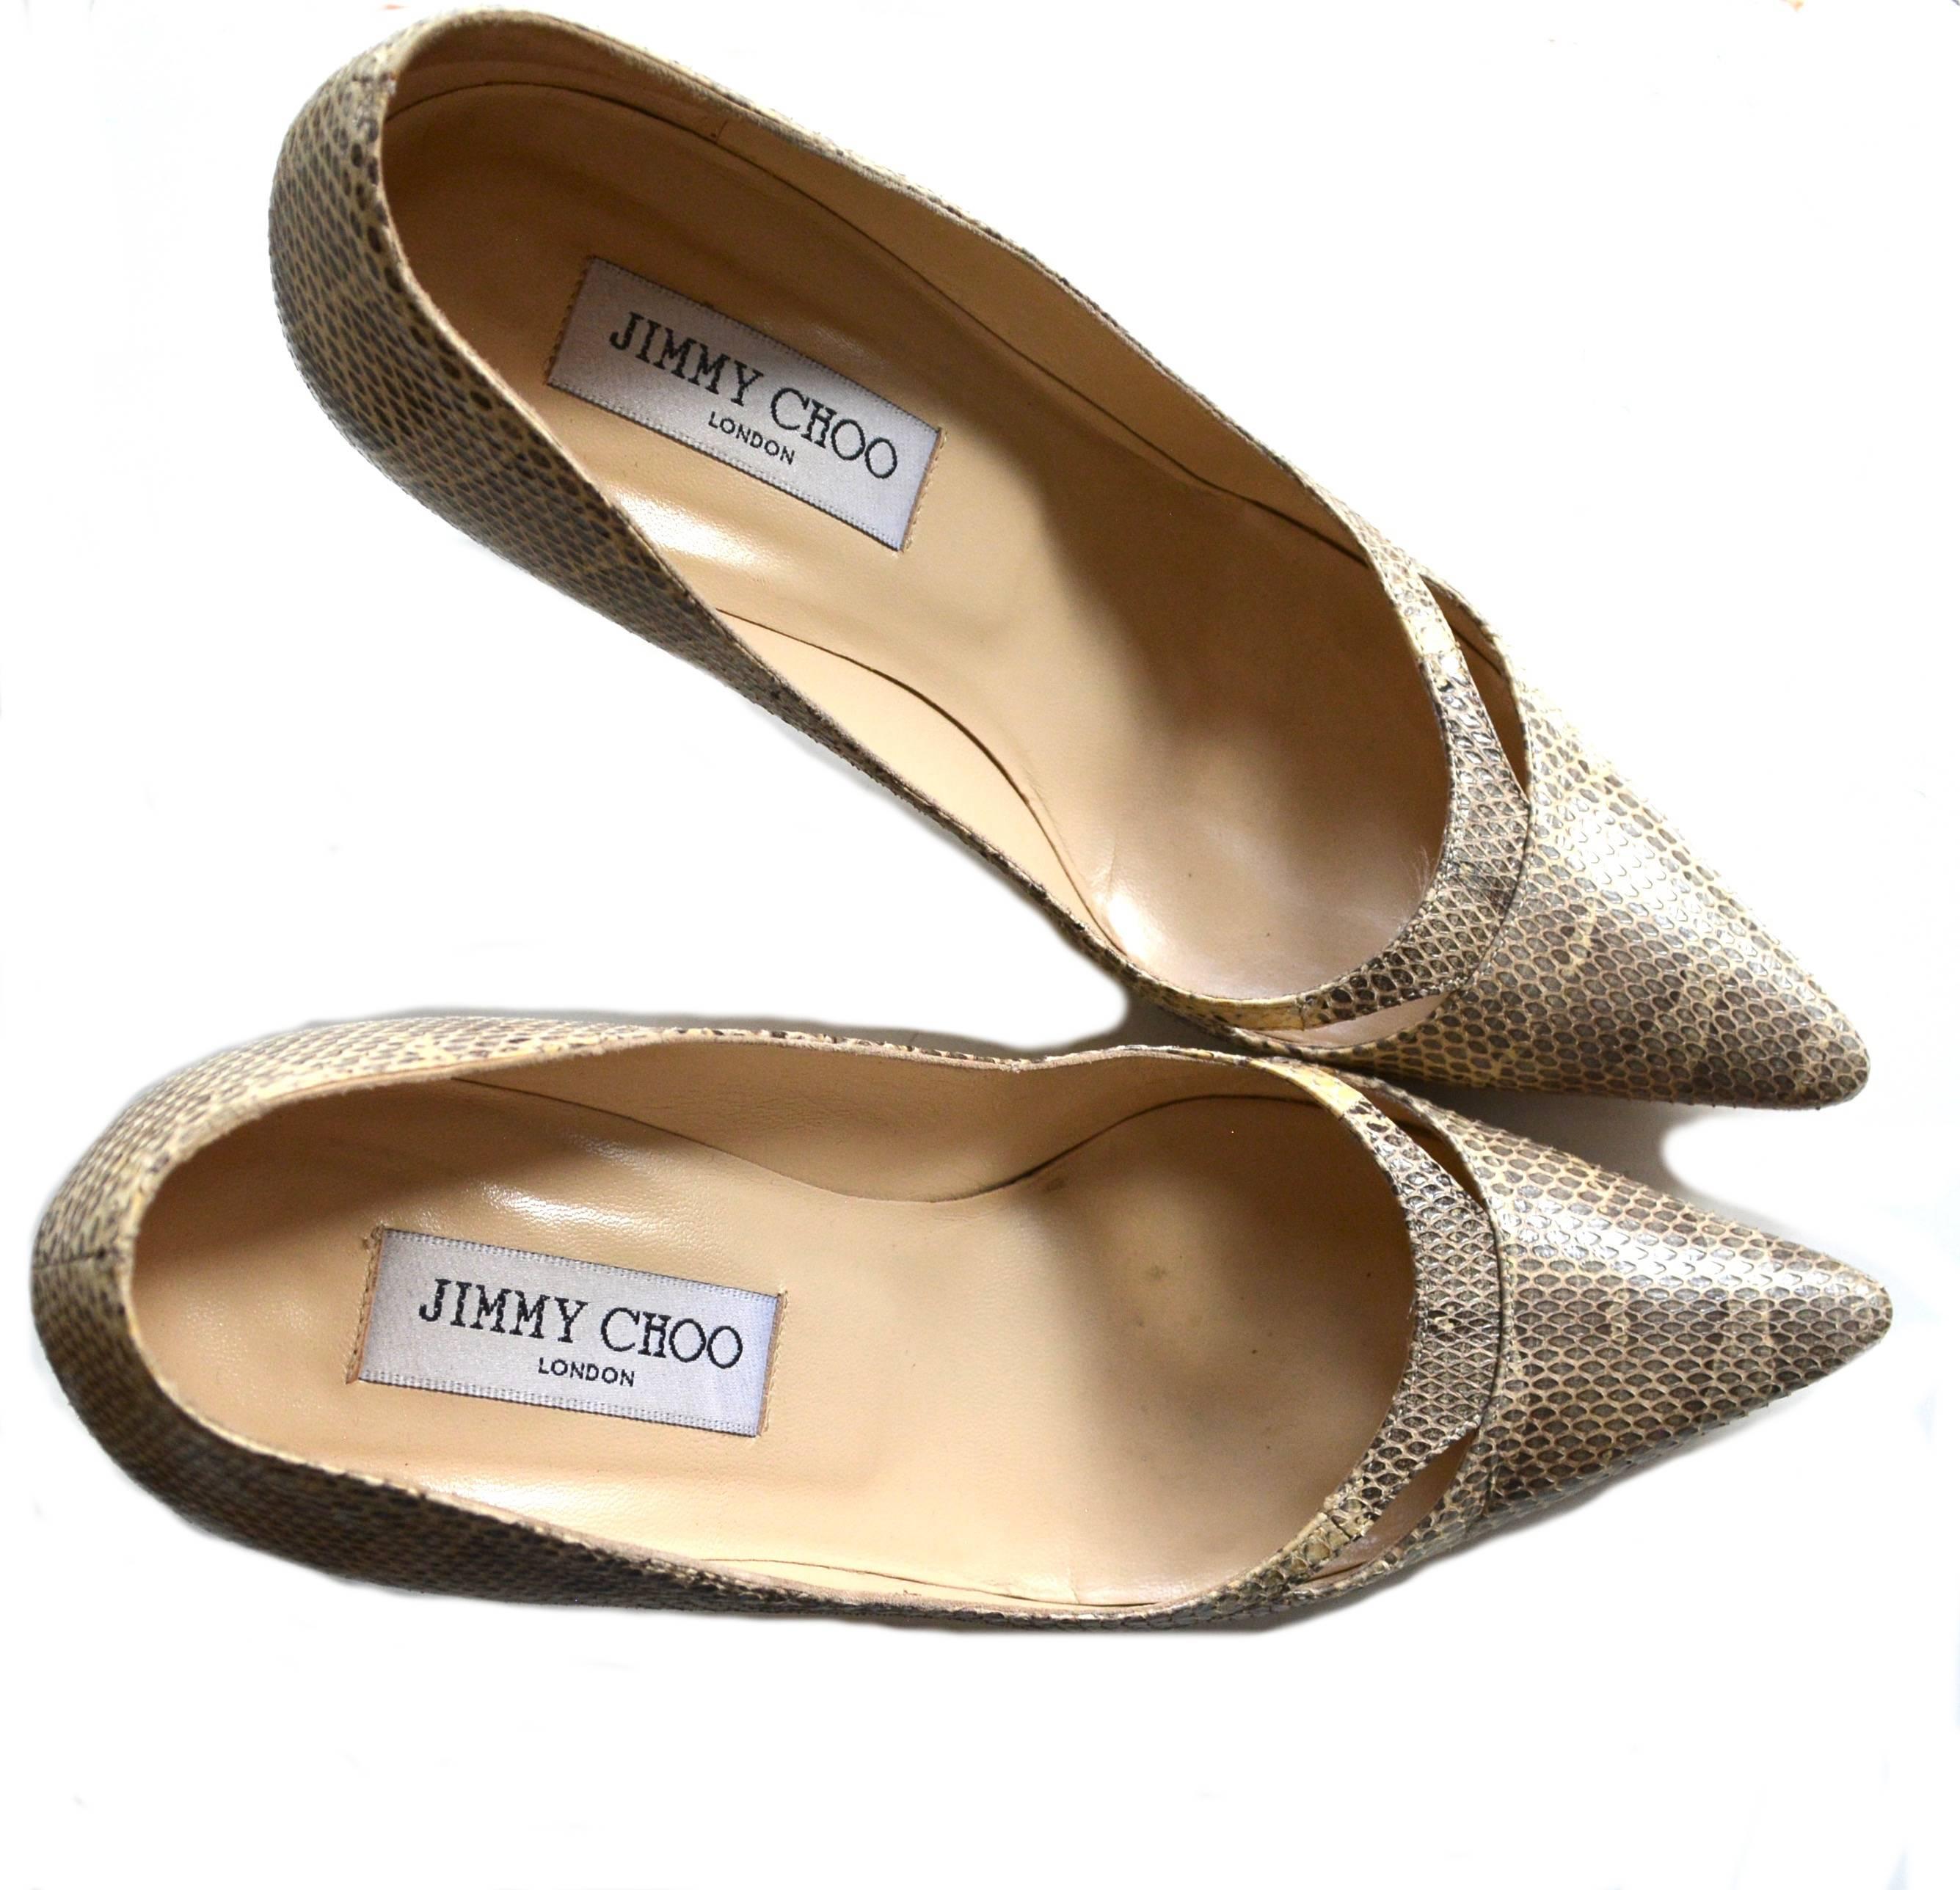 Size 37 1/2 Jimmy Choo snake skin heels in a great neutral palette. Condition is very good with wear to the sole. 